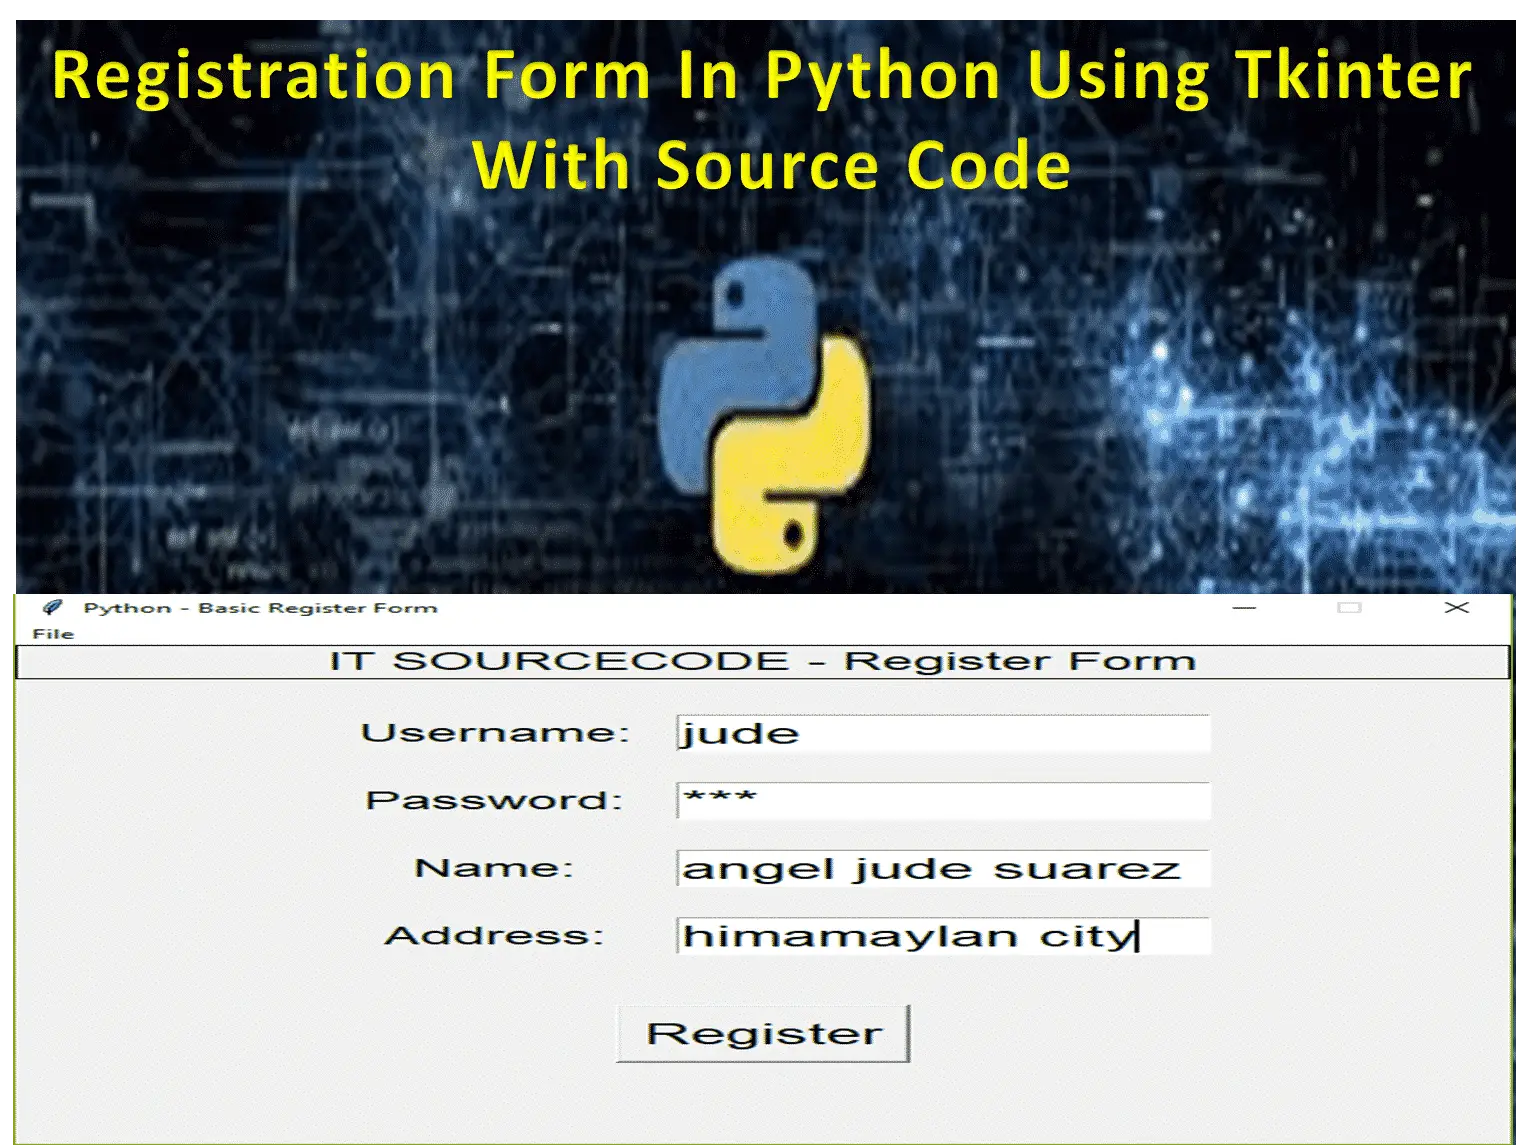 Registration_Form_In_Python_Using_Tkinter_With_Source_Code